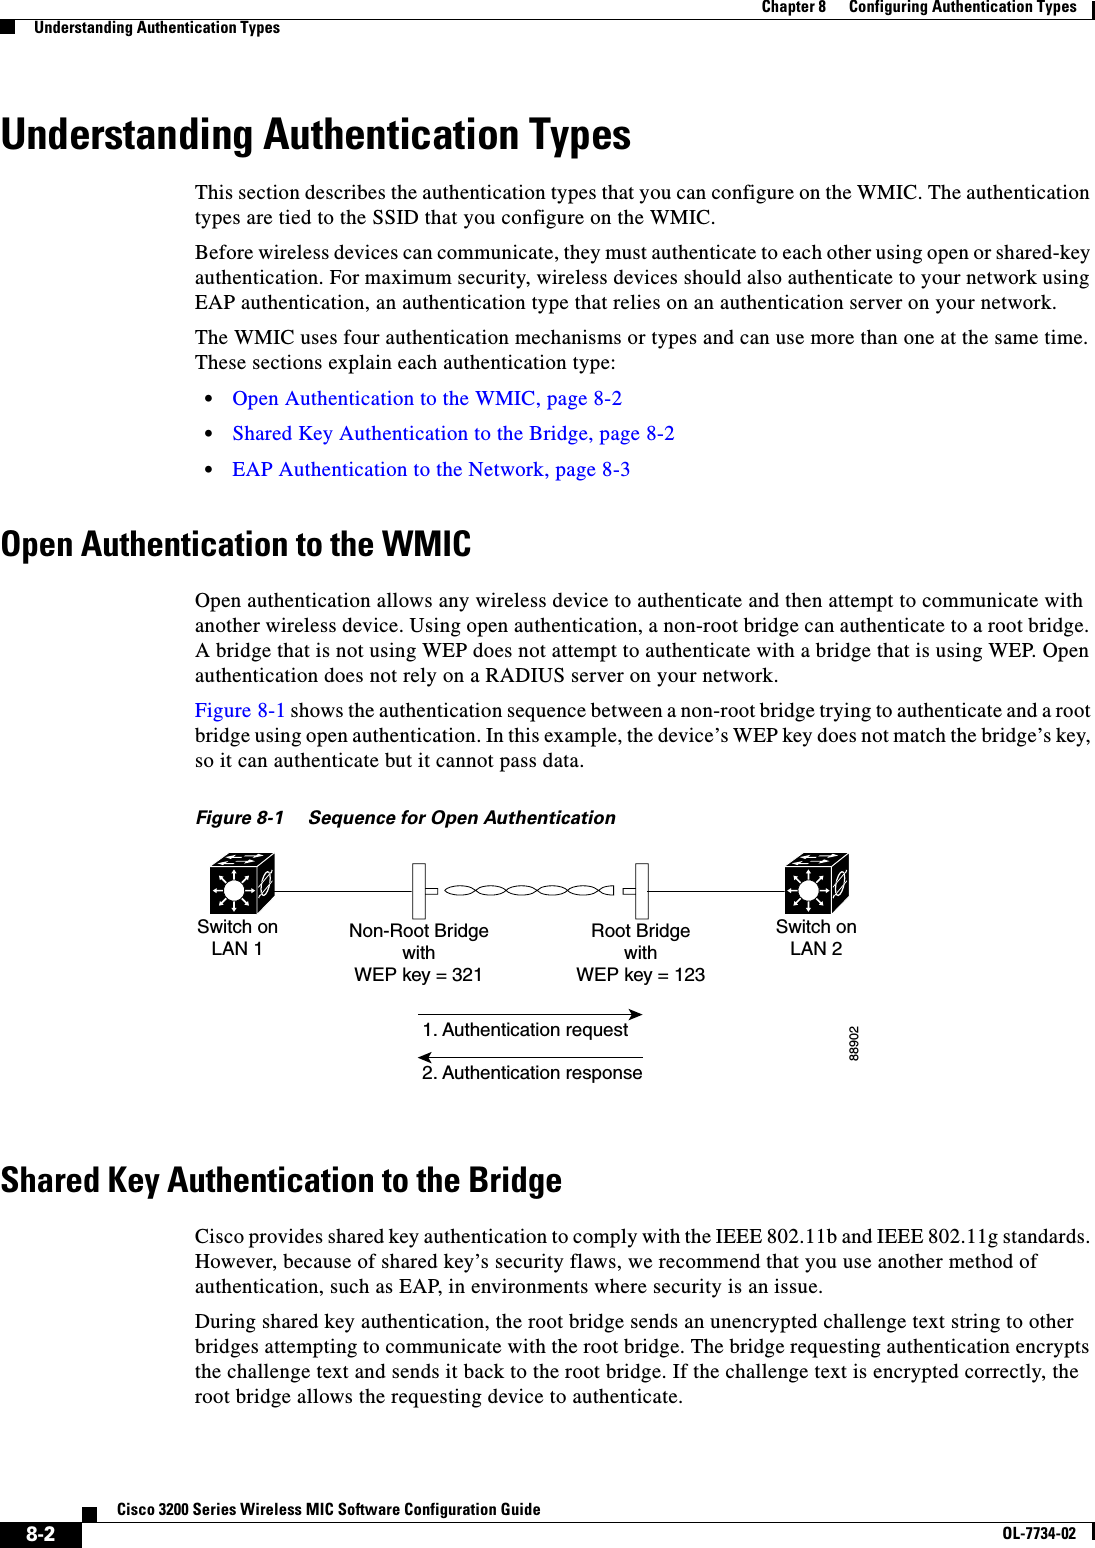 8-2Cisco 3200 Series Wireless MIC Software Configuration GuideOL-7734-02Chapter 8      Configuring Authentication TypesUnderstanding Authentication TypesUnderstanding Authentication TypesThis section describes the authentication types that you can configure on the WMIC. The authentication types are tied to the SSID that you configure on the WMIC. Before wireless devices can communicate, they must authenticate to each other using open or shared-key authentication. For maximum security, wireless devices should also authenticate to your network using EAP authentication, an authentication type that relies on an authentication server on your network.The WMIC uses four authentication mechanisms or types and can use more than one at the same time. These sections explain each authentication type:•Open Authentication to the WMIC, page 8-2•Shared Key Authentication to the Bridge, page 8-2•EAP Authentication to the Network, page 8-3Open Authentication to the WMICOpen authentication allows any wireless device to authenticate and then attempt to communicate with another wireless device. Using open authentication, a non-root bridge can authenticate to a root bridge. A bridge that is not using WEP does not attempt to authenticate with a bridge that is using WEP. Open authentication does not rely on a RADIUS server on your network. Figure 8-1 shows the authentication sequence between a non-root bridge trying to authenticate and a root bridge using open authentication. In this example, the device’s WEP key does not match the bridge’s key, so it can authenticate but it cannot pass data.Figure 8-1 Sequence for Open AuthenticationShared Key Authentication to the BridgeCisco provides shared key authentication to comply with the IEEE 802.11b and IEEE 802.11g standards. However, because of shared key’s security flaws, we recommend that you use another method of authentication, such as EAP, in environments where security is an issue.During shared key authentication, the root bridge sends an unencrypted challenge text string to other bridges attempting to communicate with the root bridge. The bridge requesting authentication encrypts the challenge text and sends it back to the root bridge. If the challenge text is encrypted correctly, the root bridge allows the requesting device to authenticate. 88902Switch onLAN 11. Authentication requestSwitch onLAN 2Non-Root BridgewithWEP key = 321Root BridgewithWEP key = 1232. Authentication response